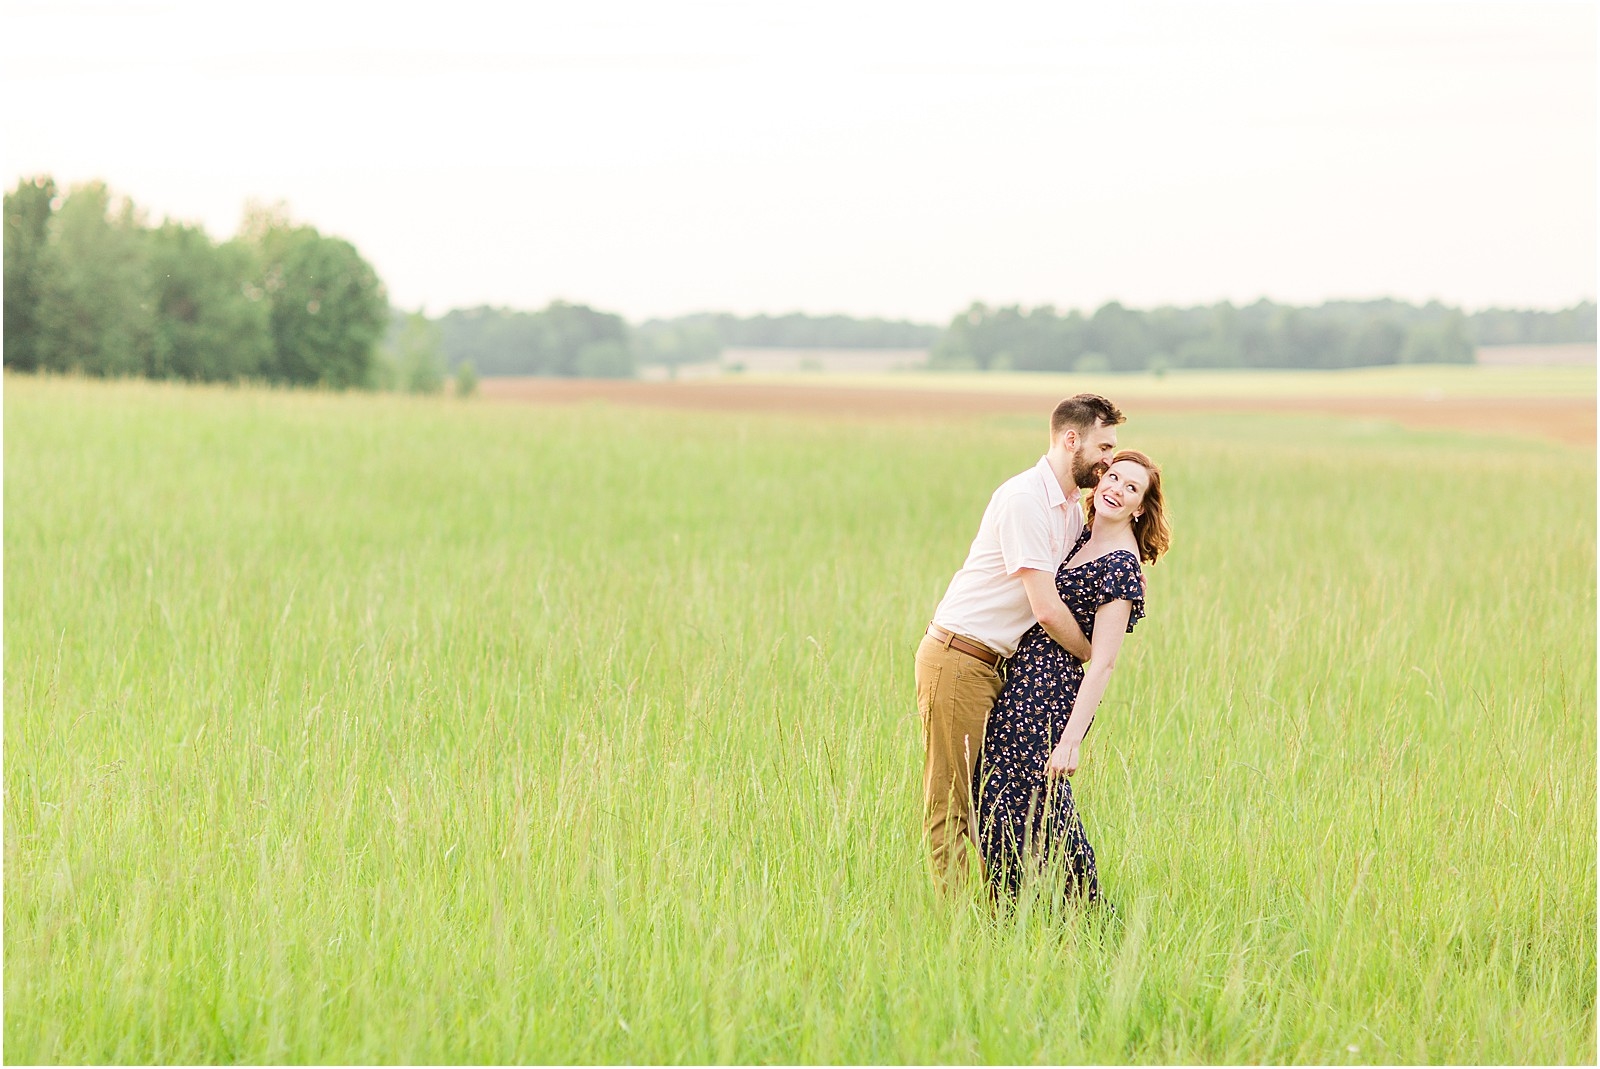 Amy and Logan | The Corner House Bed and Breakfast | Engagement Session027.jpg